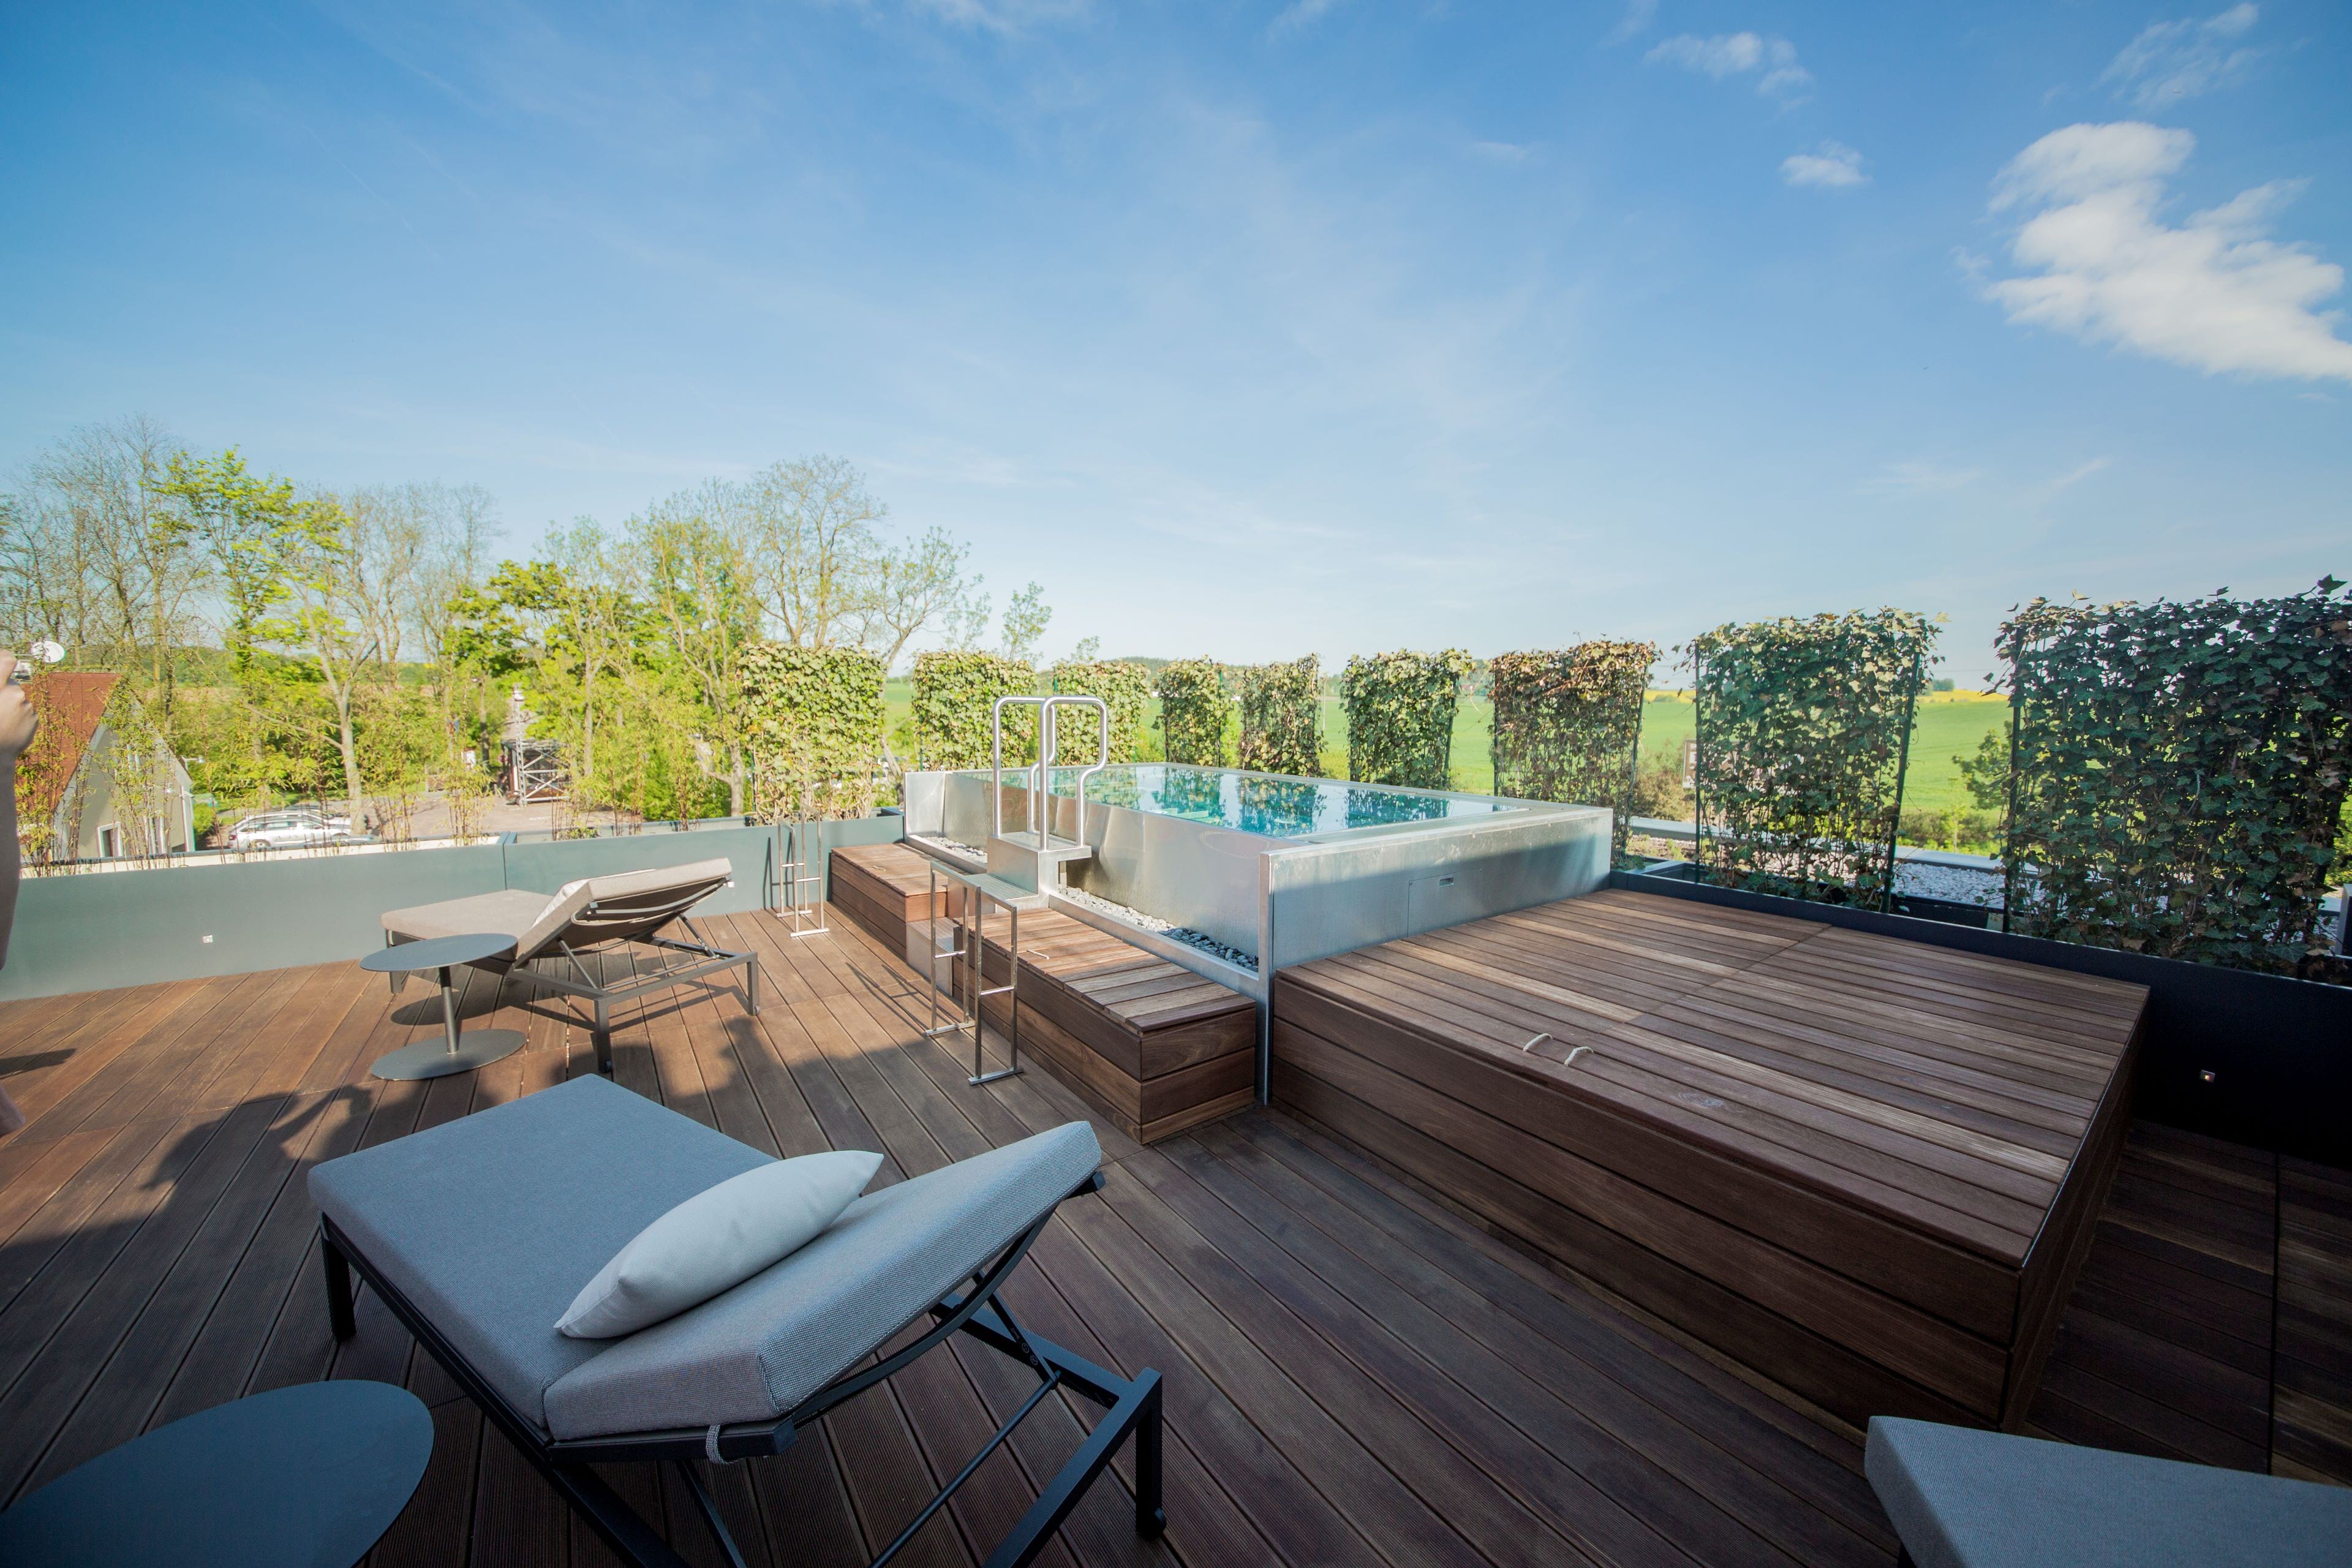 Terrace of the Hotel Spa with Customized IMAGINOX Whirlpool